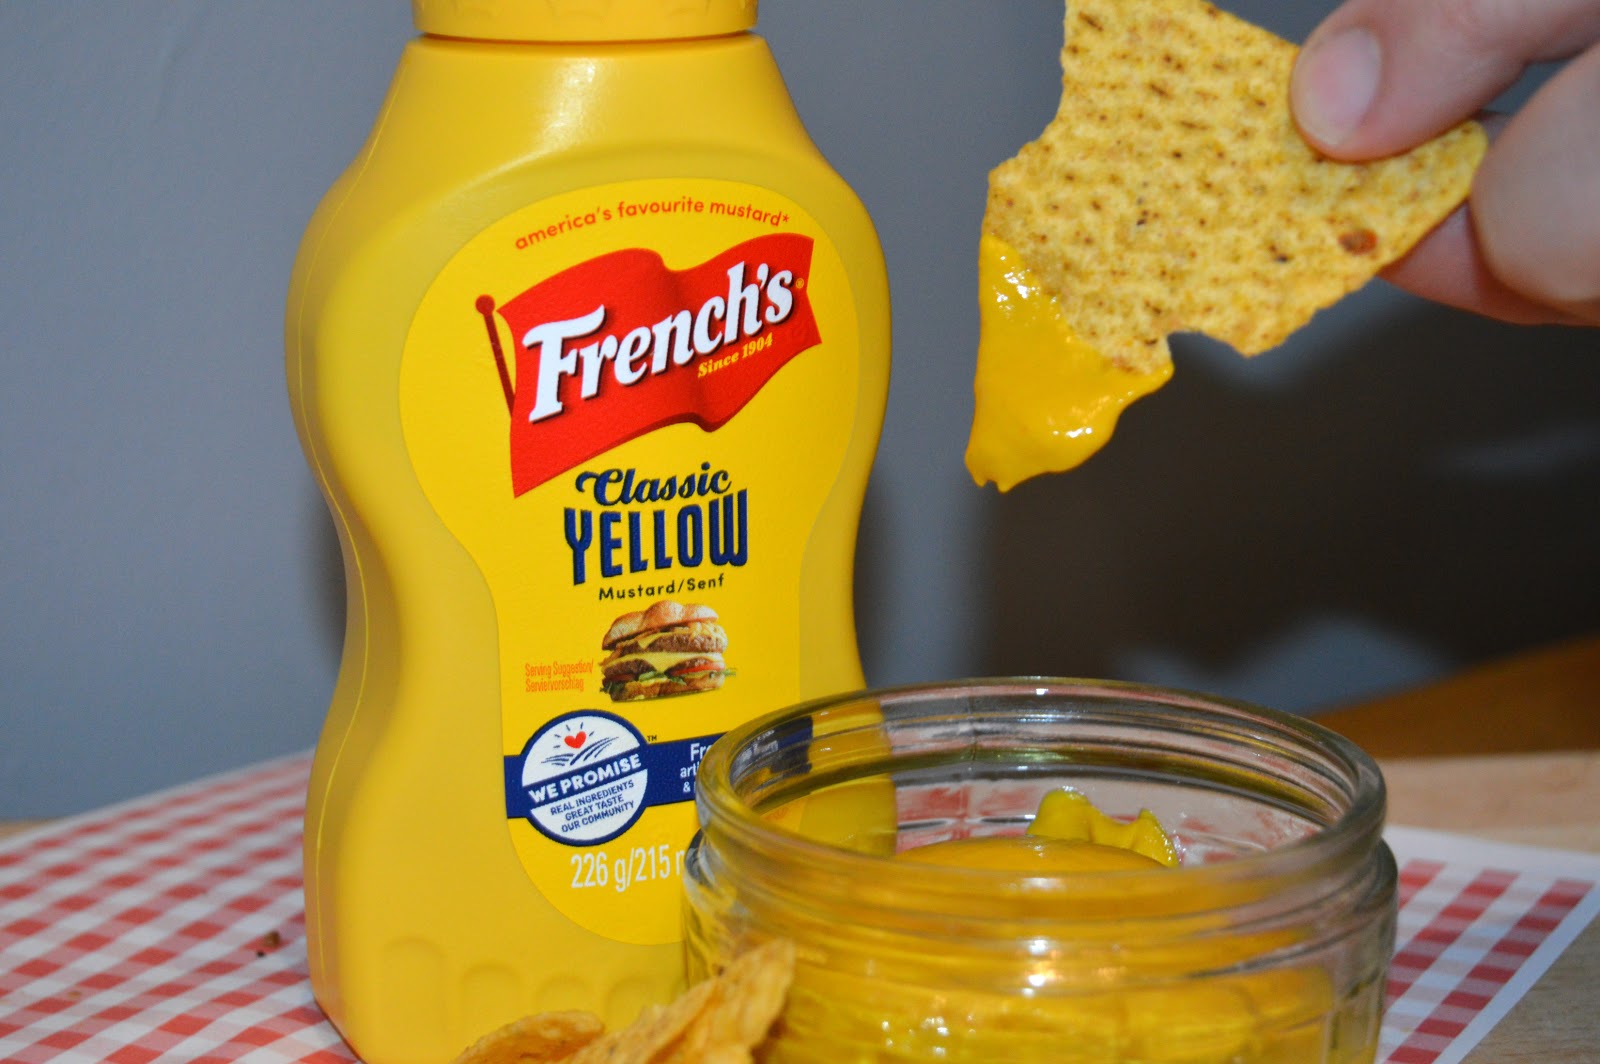 Making a Club Sandwich and French's Mustard